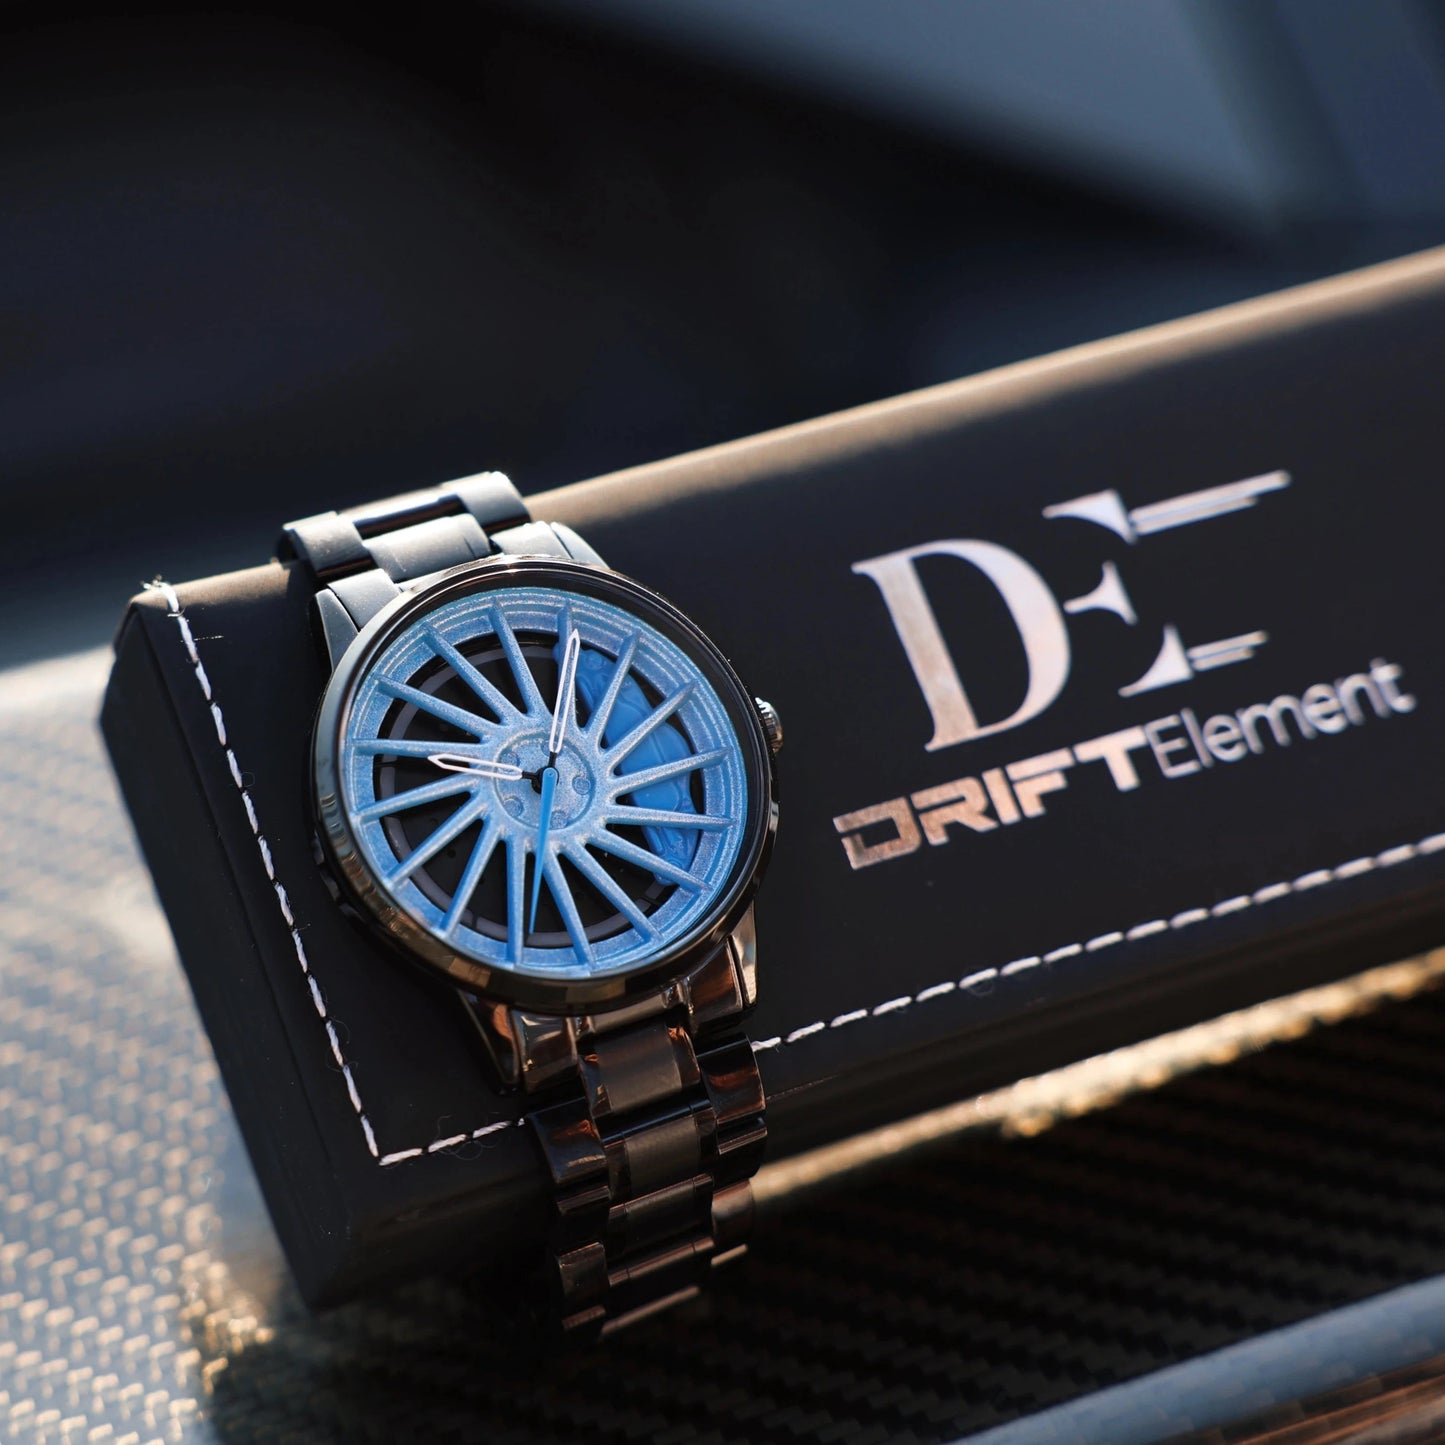 The DriftElement Rim Watch in Skyblue - a real eye-catcher on your wrist! ⌚✨ #FashionForward